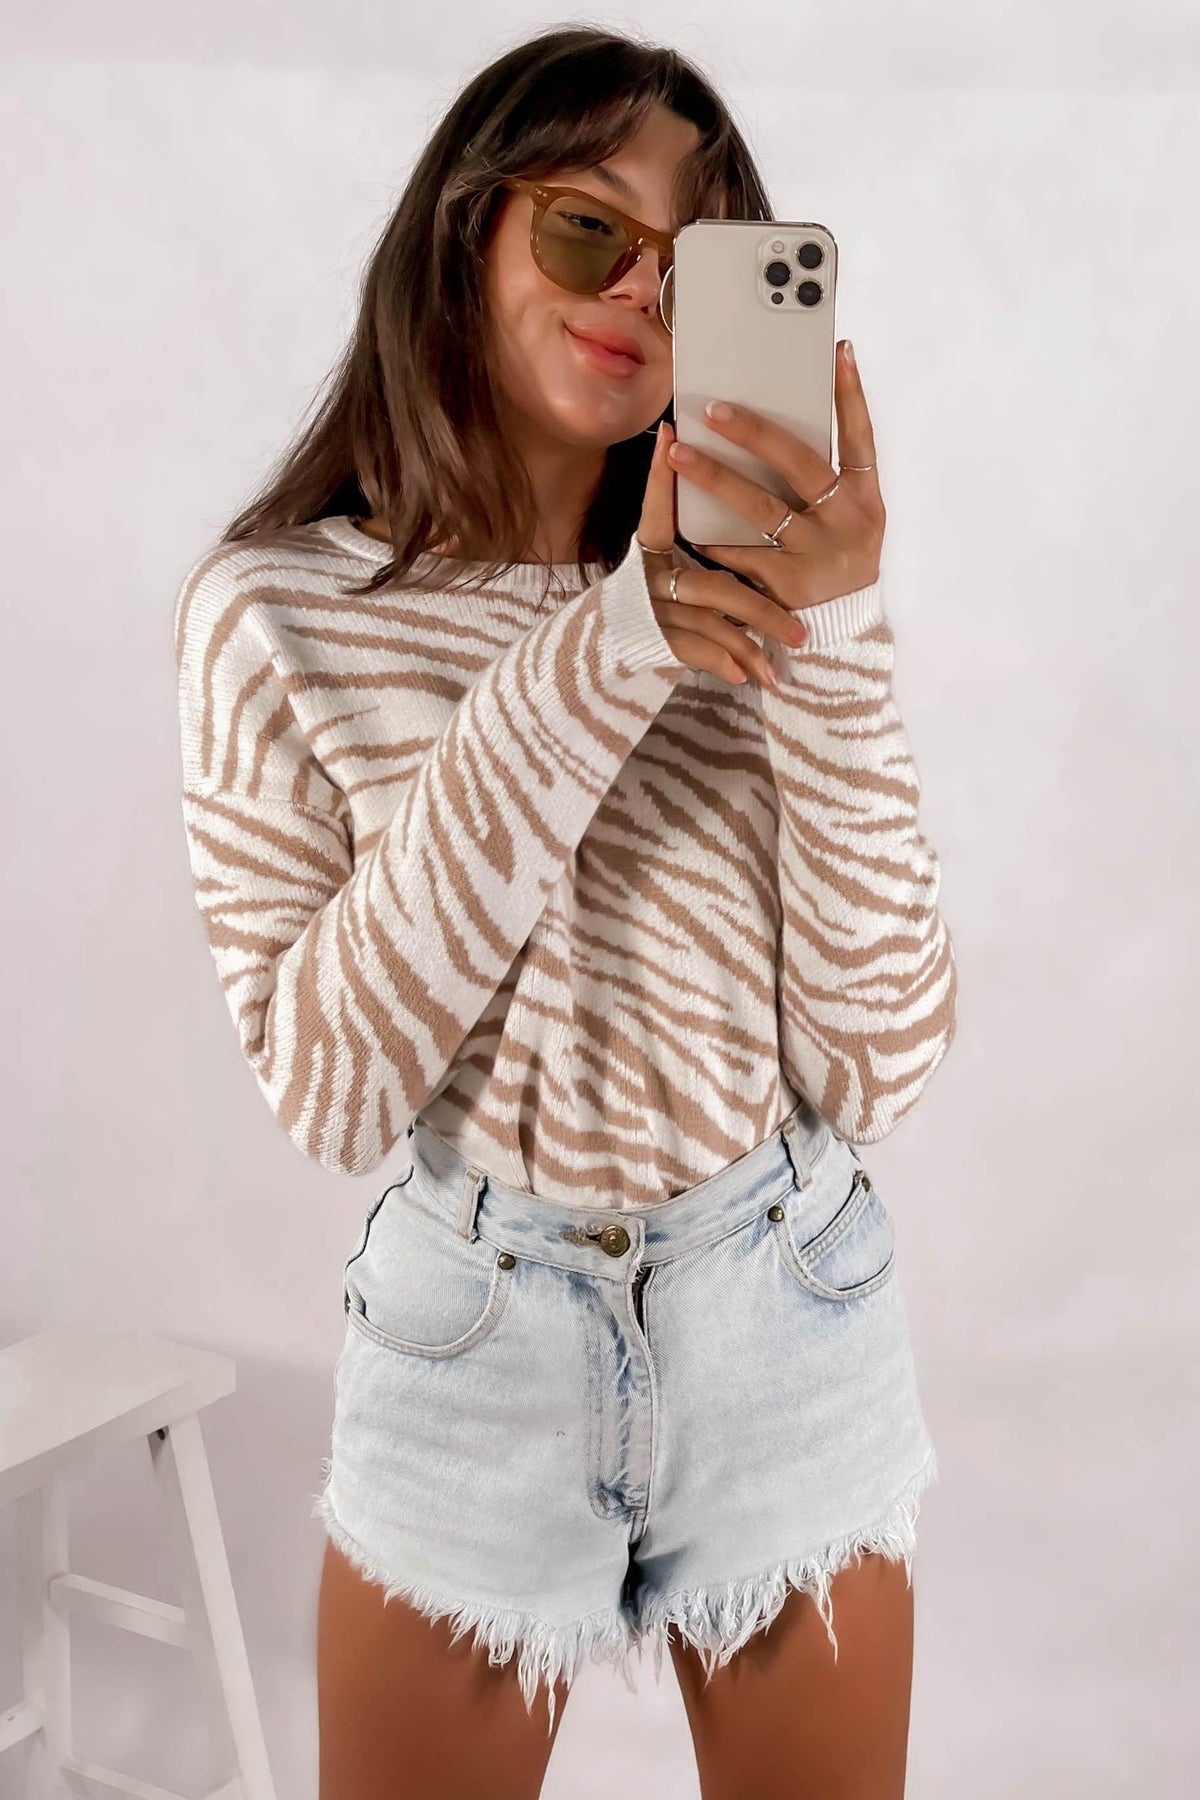 Devinn Top, LONG SLEEVE, NYLON &amp; RAYON, NYLON AND RAYON, RAYON &amp; NYLON, RAYON AND NYLON, WHITE, Our New Devinn Top Is Now Only $61.00 Exclusive At Mishkah, Our New Devinn Top is now only $61.00-We Have The Latest Women&#39;s Tops @ Mishkah Online Fashion Boutique-MISHKAH